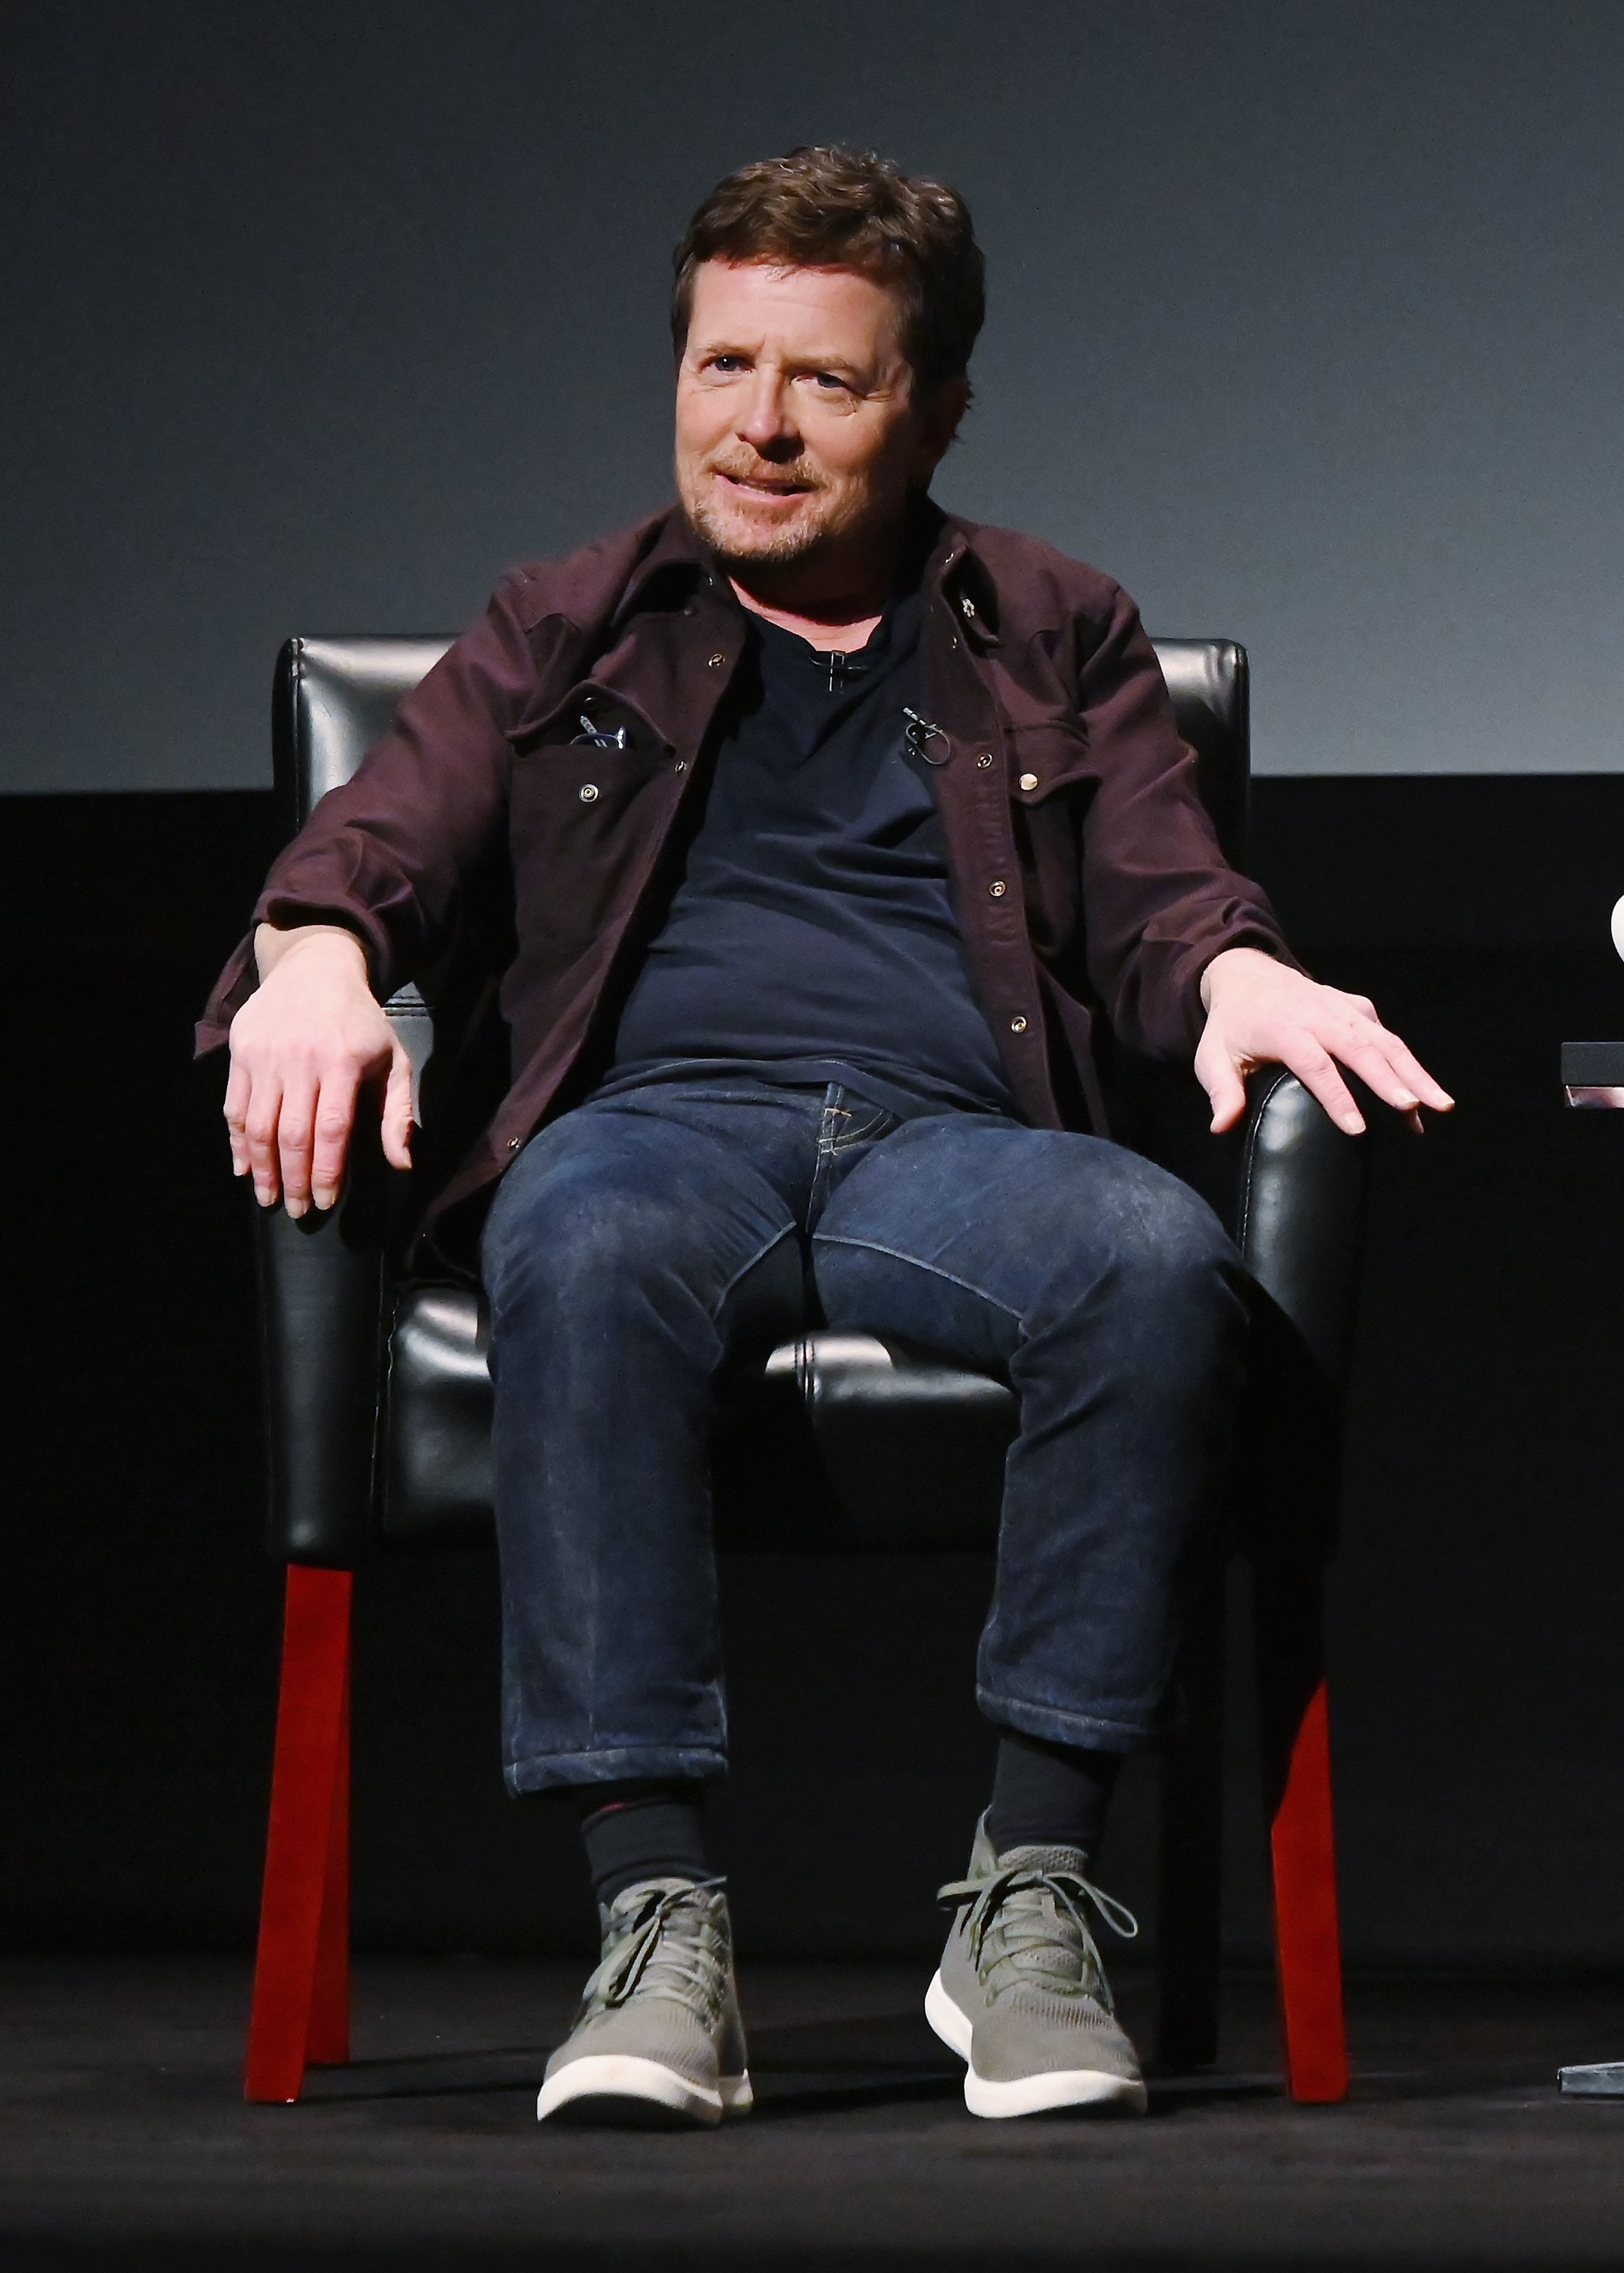 Michael J. Fox, who also has Parkinson's, speaks at the Tribeca Talks - Storytellers - 2019 Tribeca Film Festival at BMCC Tribeca PAC on April 30, 2019 in New York City | Source: Getty Images